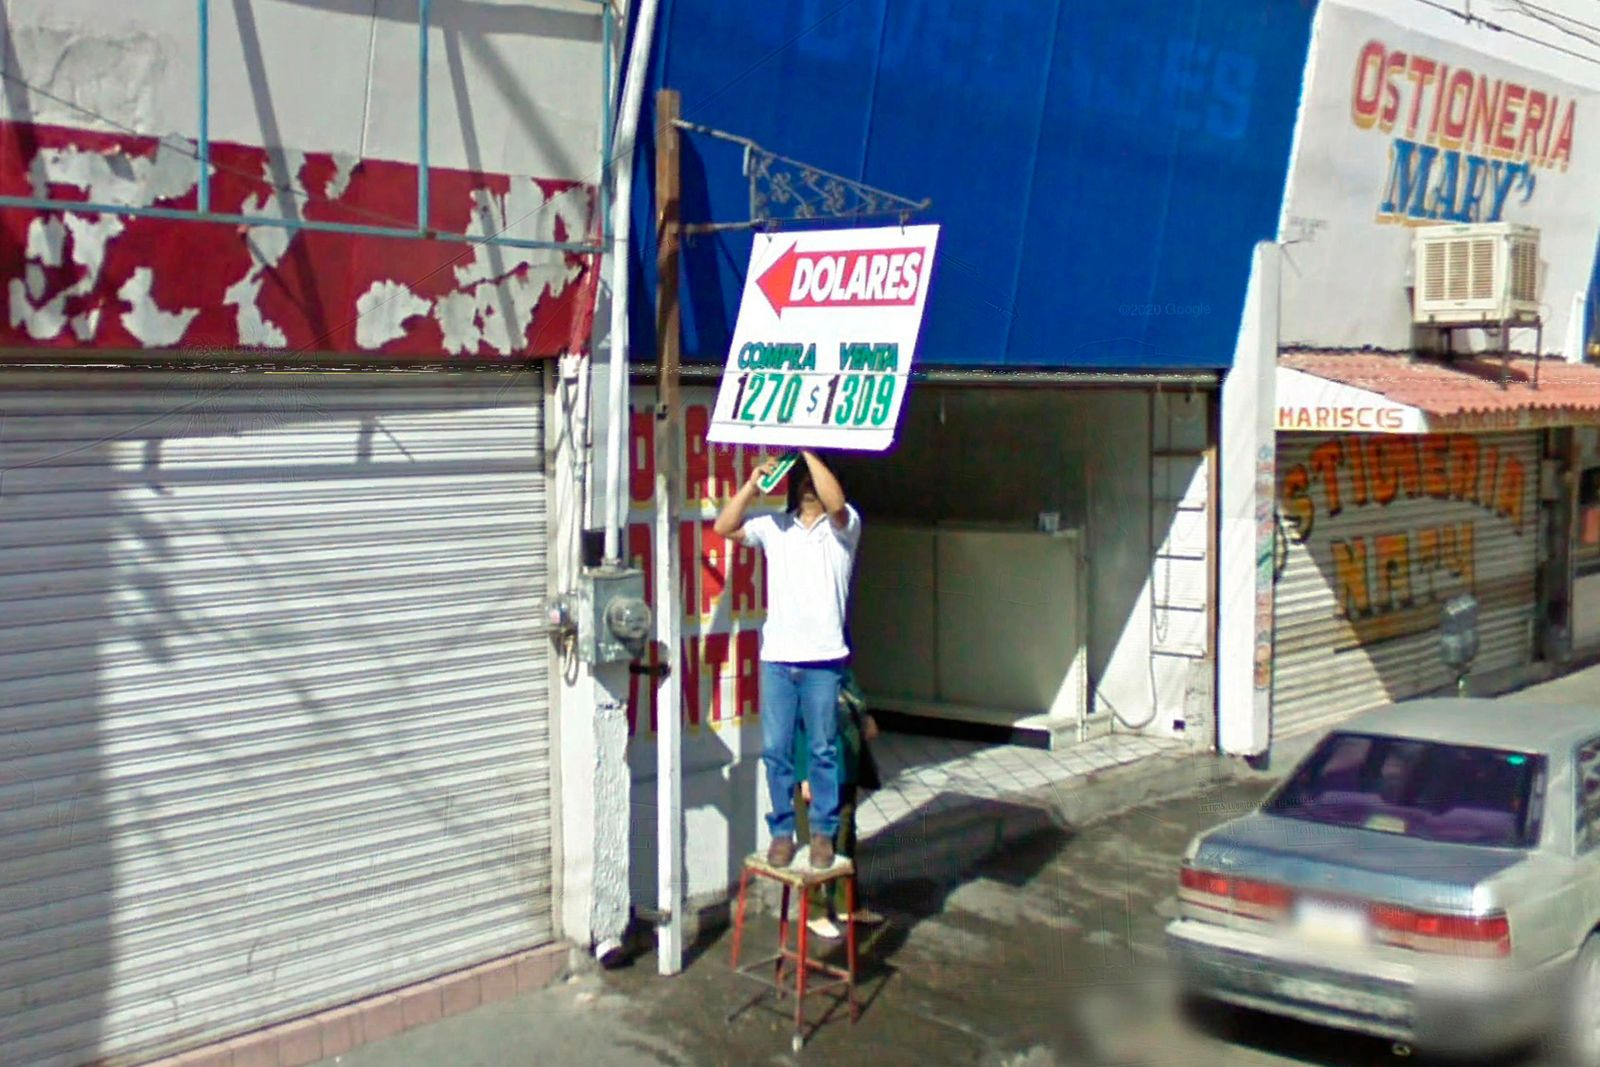 © Alejandro "Luperca" Morales - 116 Ugarte. The lowest exchange rate I have seen on Google Maps. Foreign exchange businesses are popular near the border.